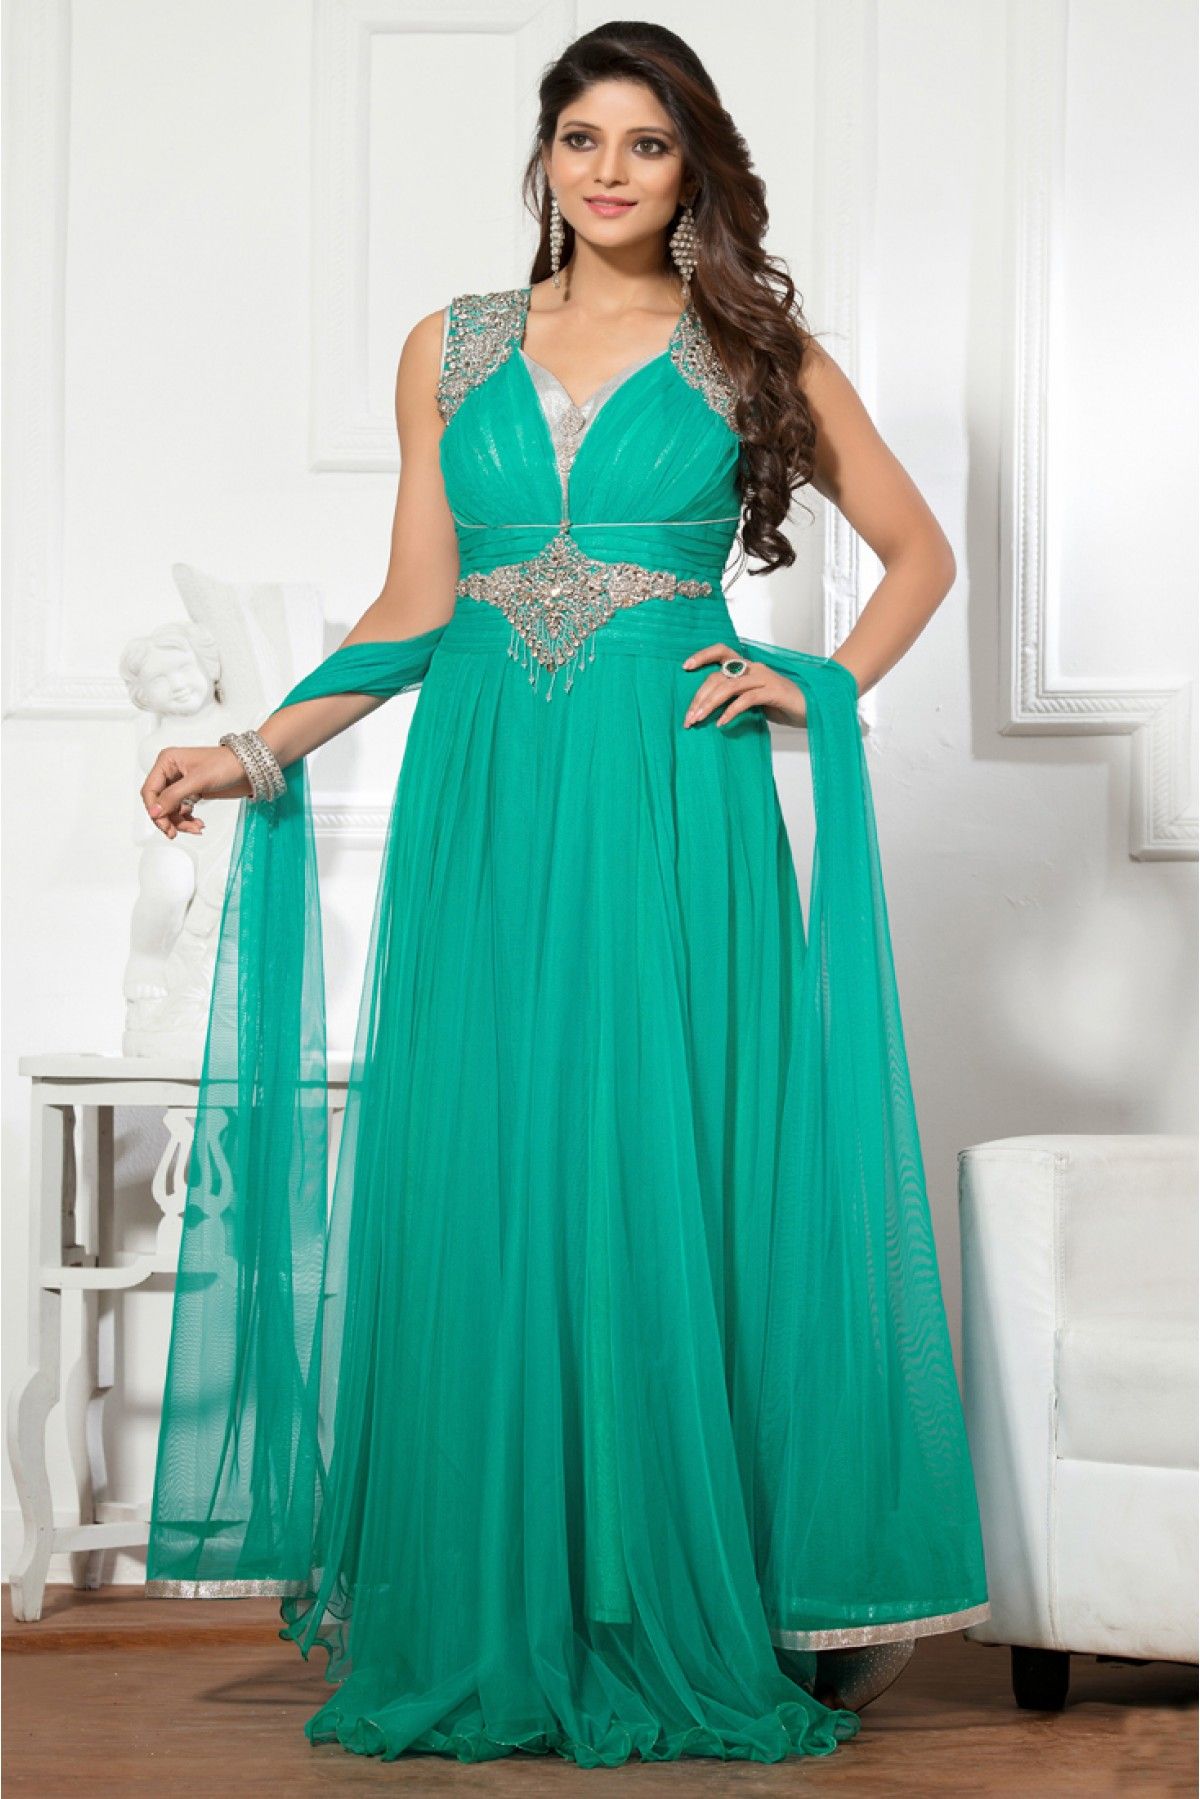 Indian Prom Dresses 2016 Turquoise Green Plus Size Evening Gowns Long Chiffon Beaded Special ...